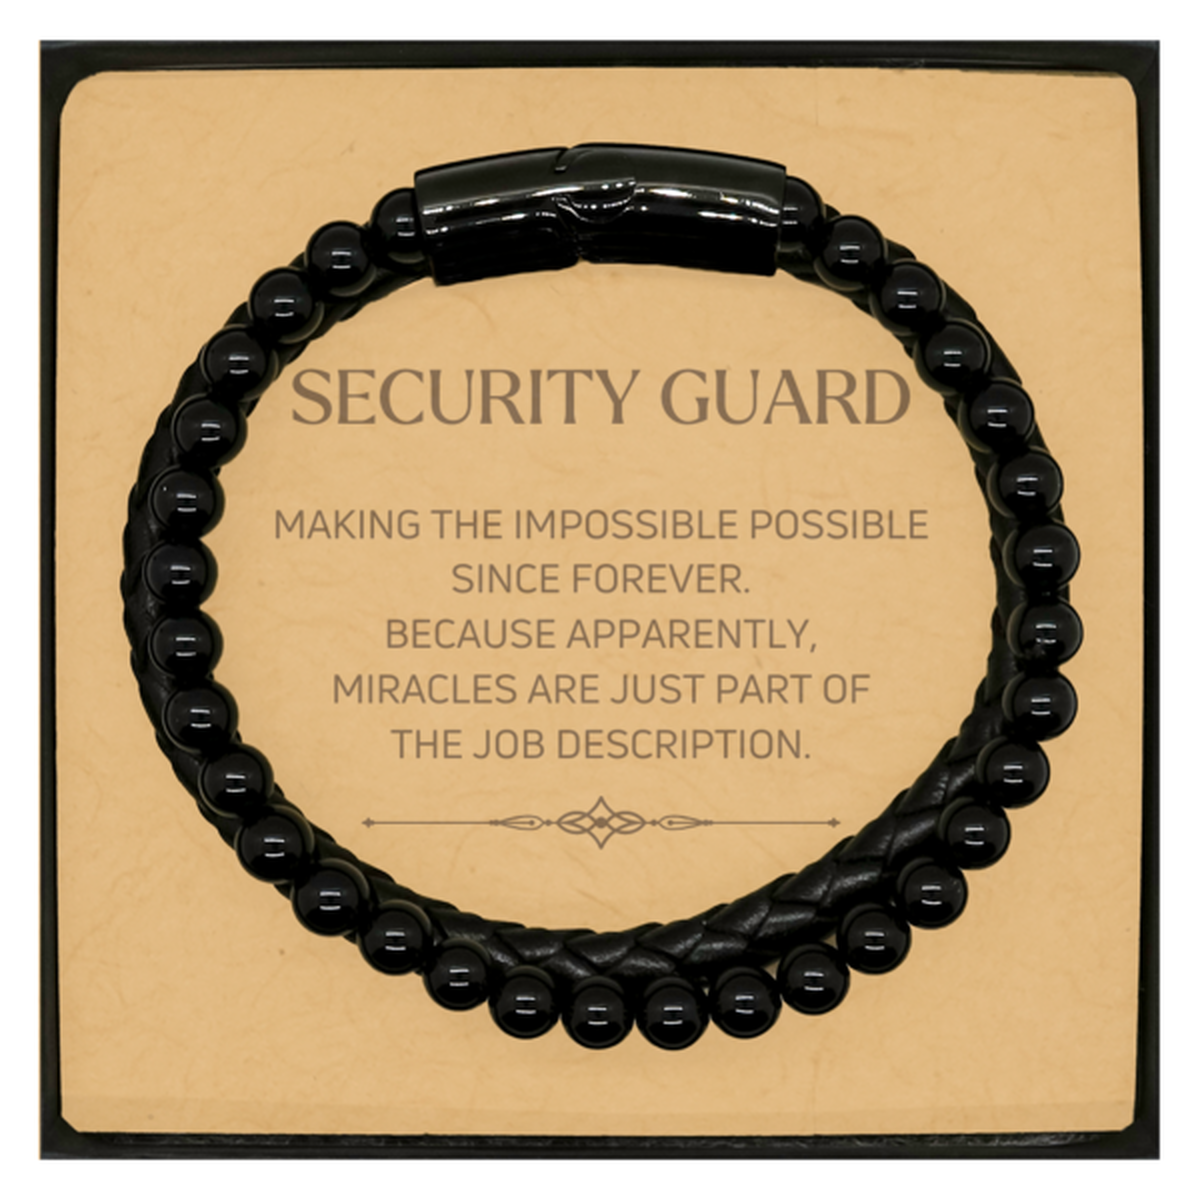 Funny Security Guard Gifts, Miracles are just part of the job description, Inspirational Birthday Christmas Stone Leather Bracelets For Security Guard, Men, Women, Coworkers, Friends, Boss